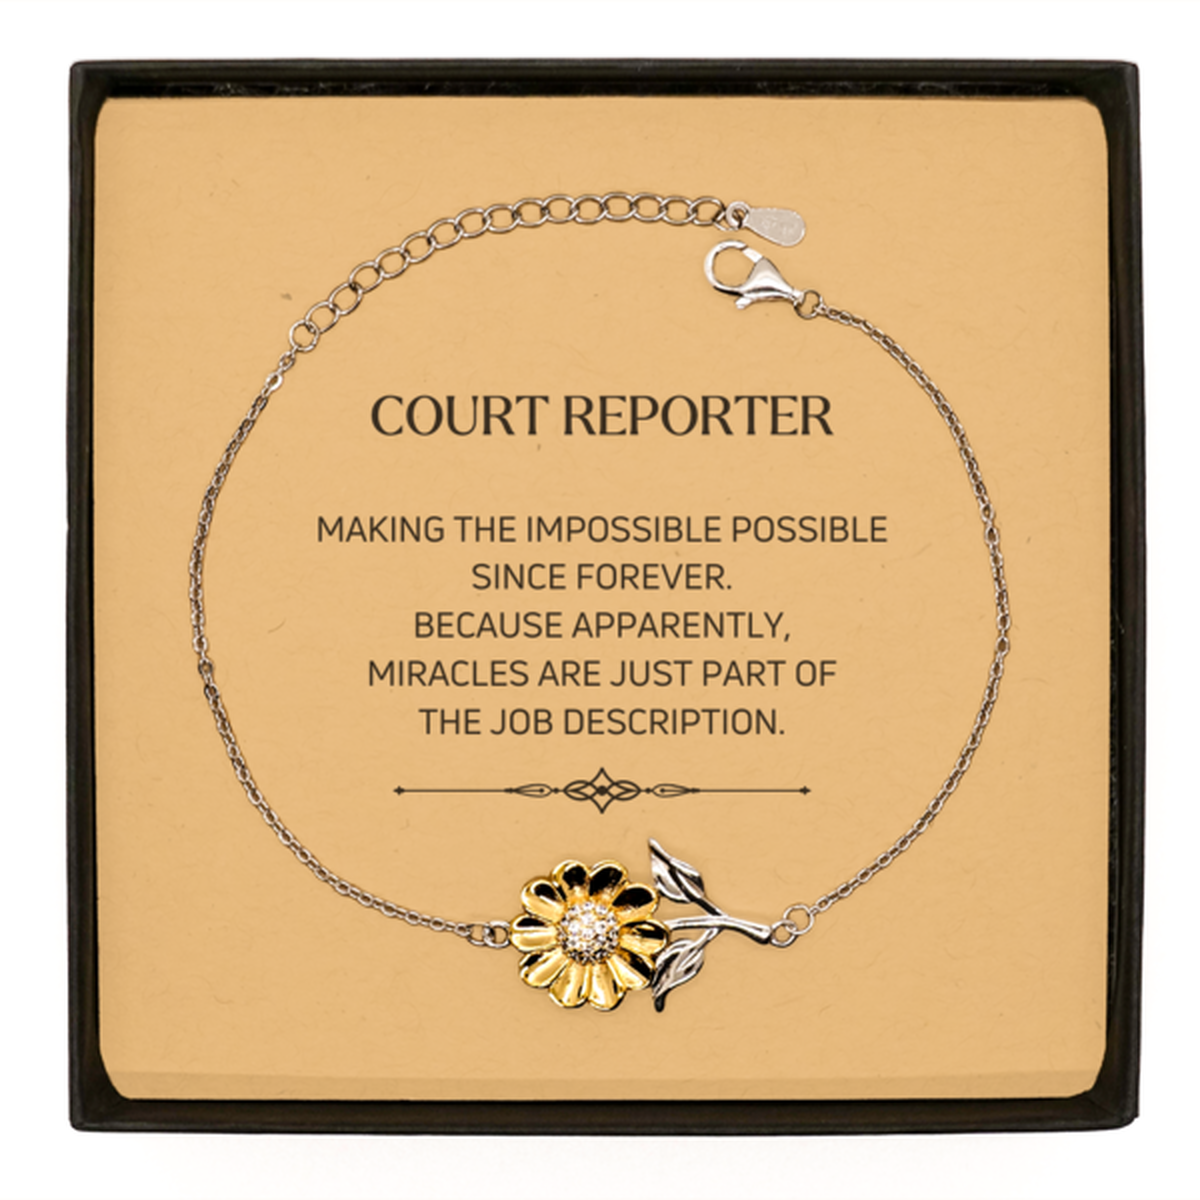 Funny Court Reporter Gifts, Miracles are just part of the job description, Inspirational Birthday Sunflower Bracelet For Court Reporter, Men, Women, Coworkers, Friends, Boss